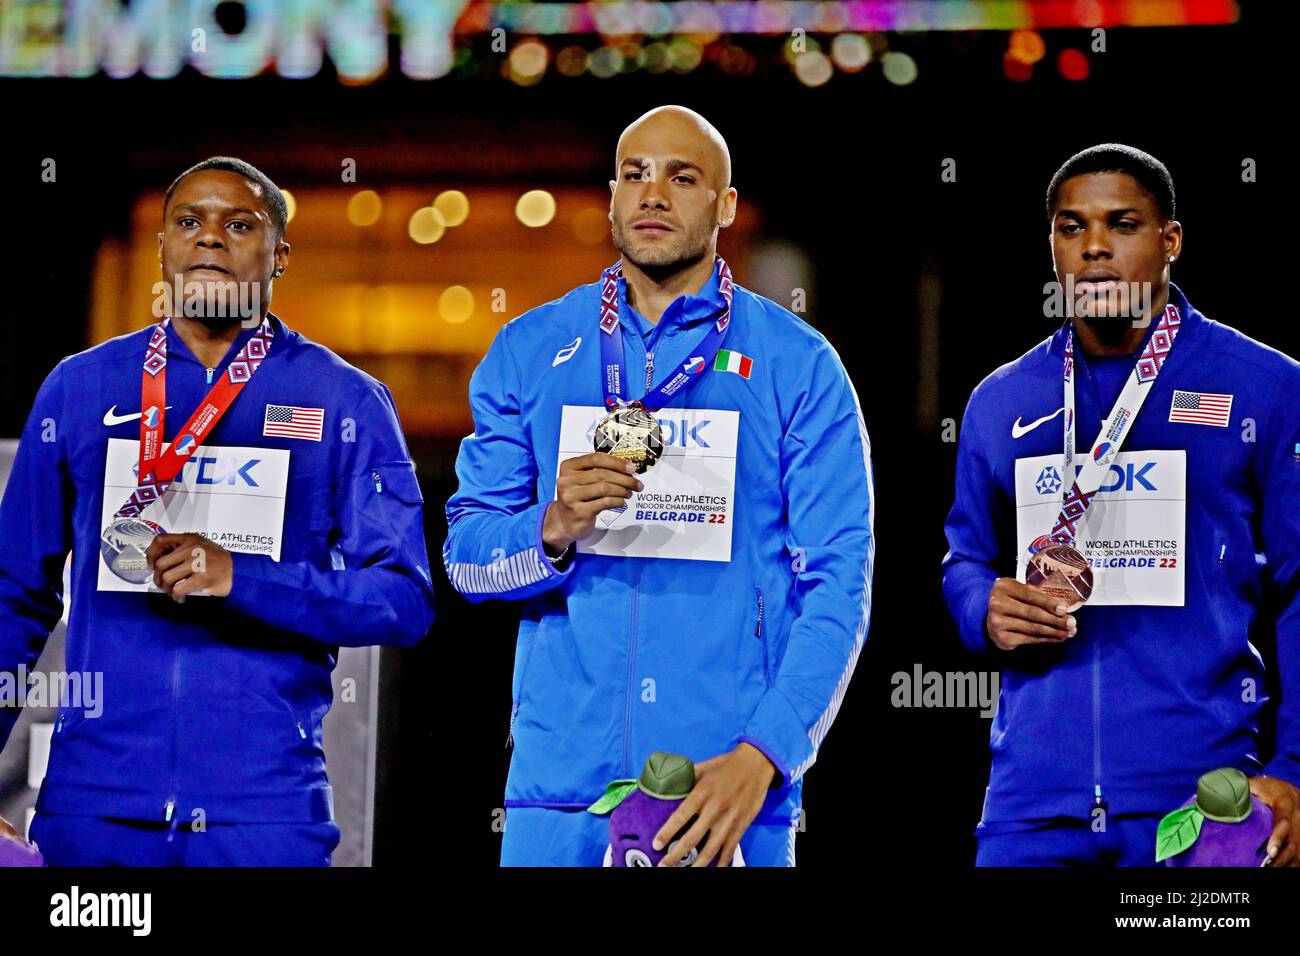 Men's 60m gold medalist Lamont Marcell Jacobs (GRE), center, poses with silver medalist Christian Coleman (USA), left, and bronze medalist Marvin Brac Stock Photo